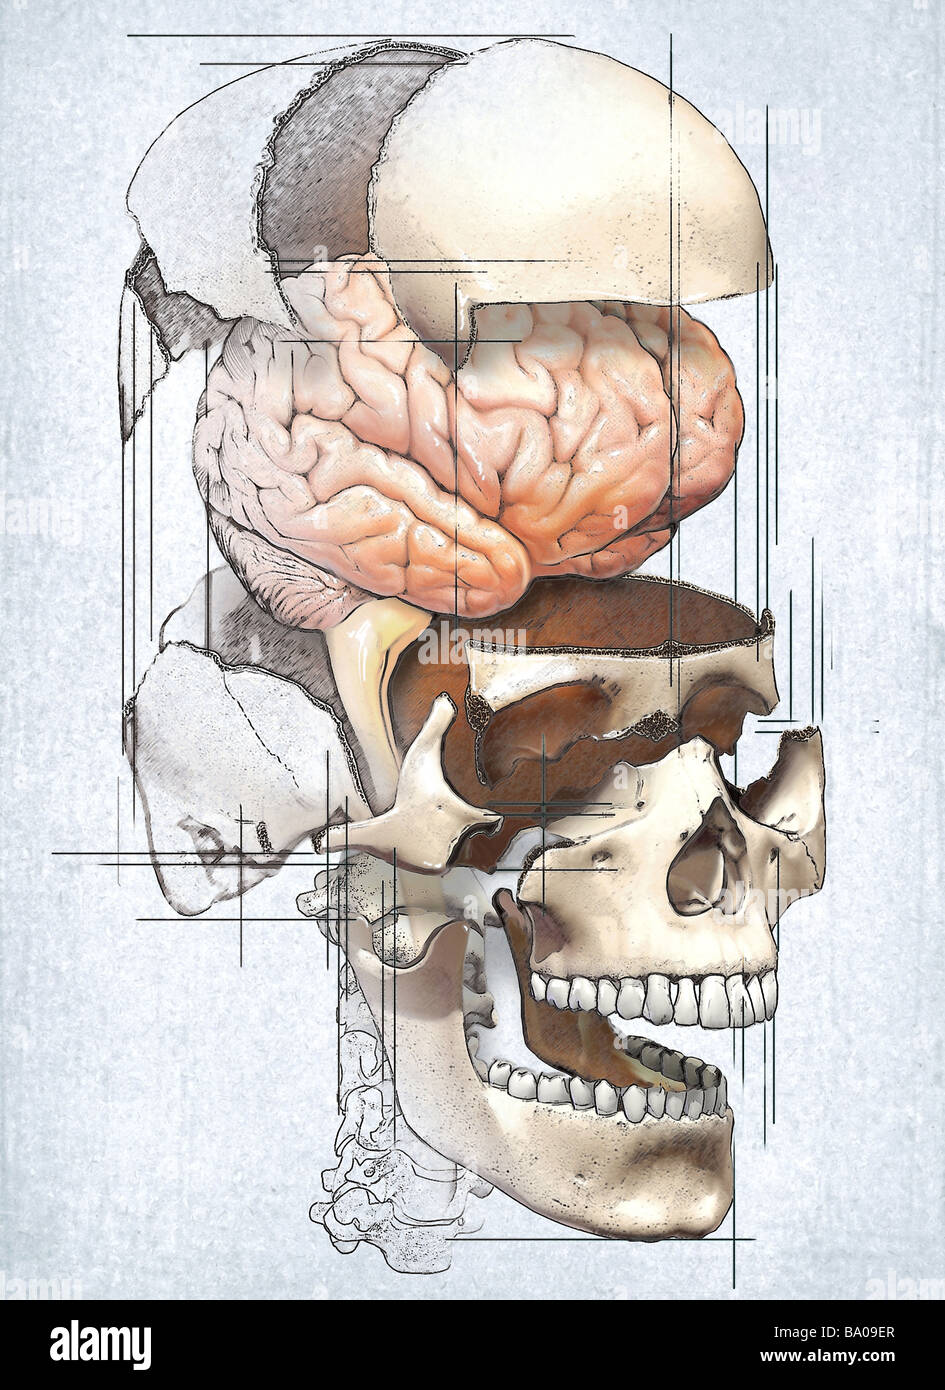 This medical image depicts an exploded view of the skull with the brain in an editorial style illustration. Stock Photo